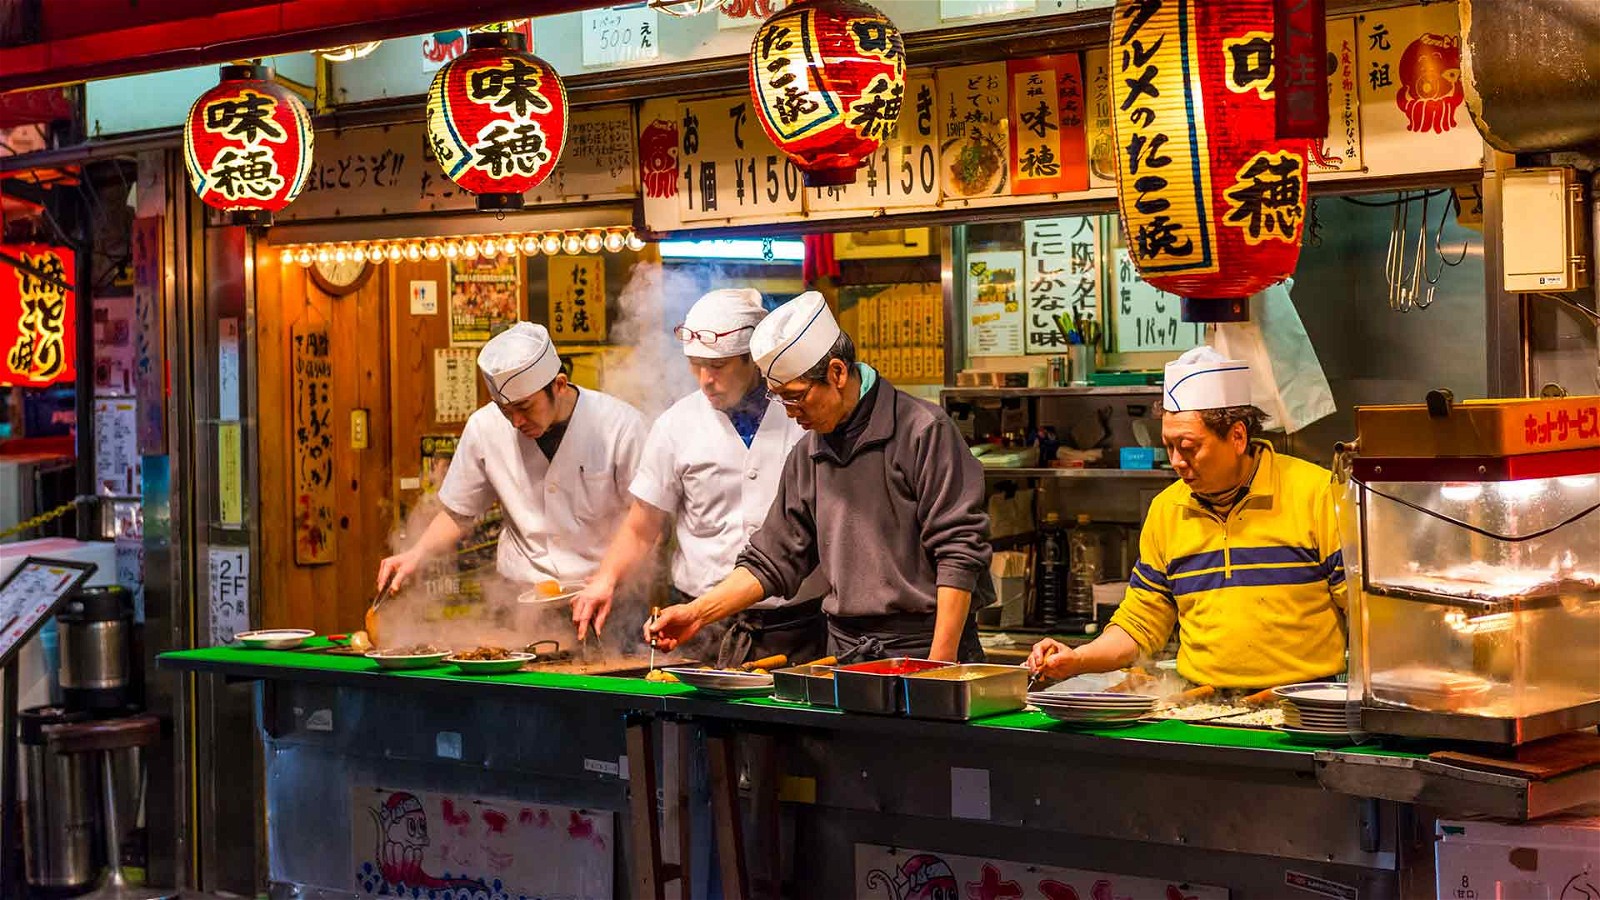 A Gastronomic Delight: World-renowned Cuisine Experiencing delicious food is inevitable for those visiting Osaka